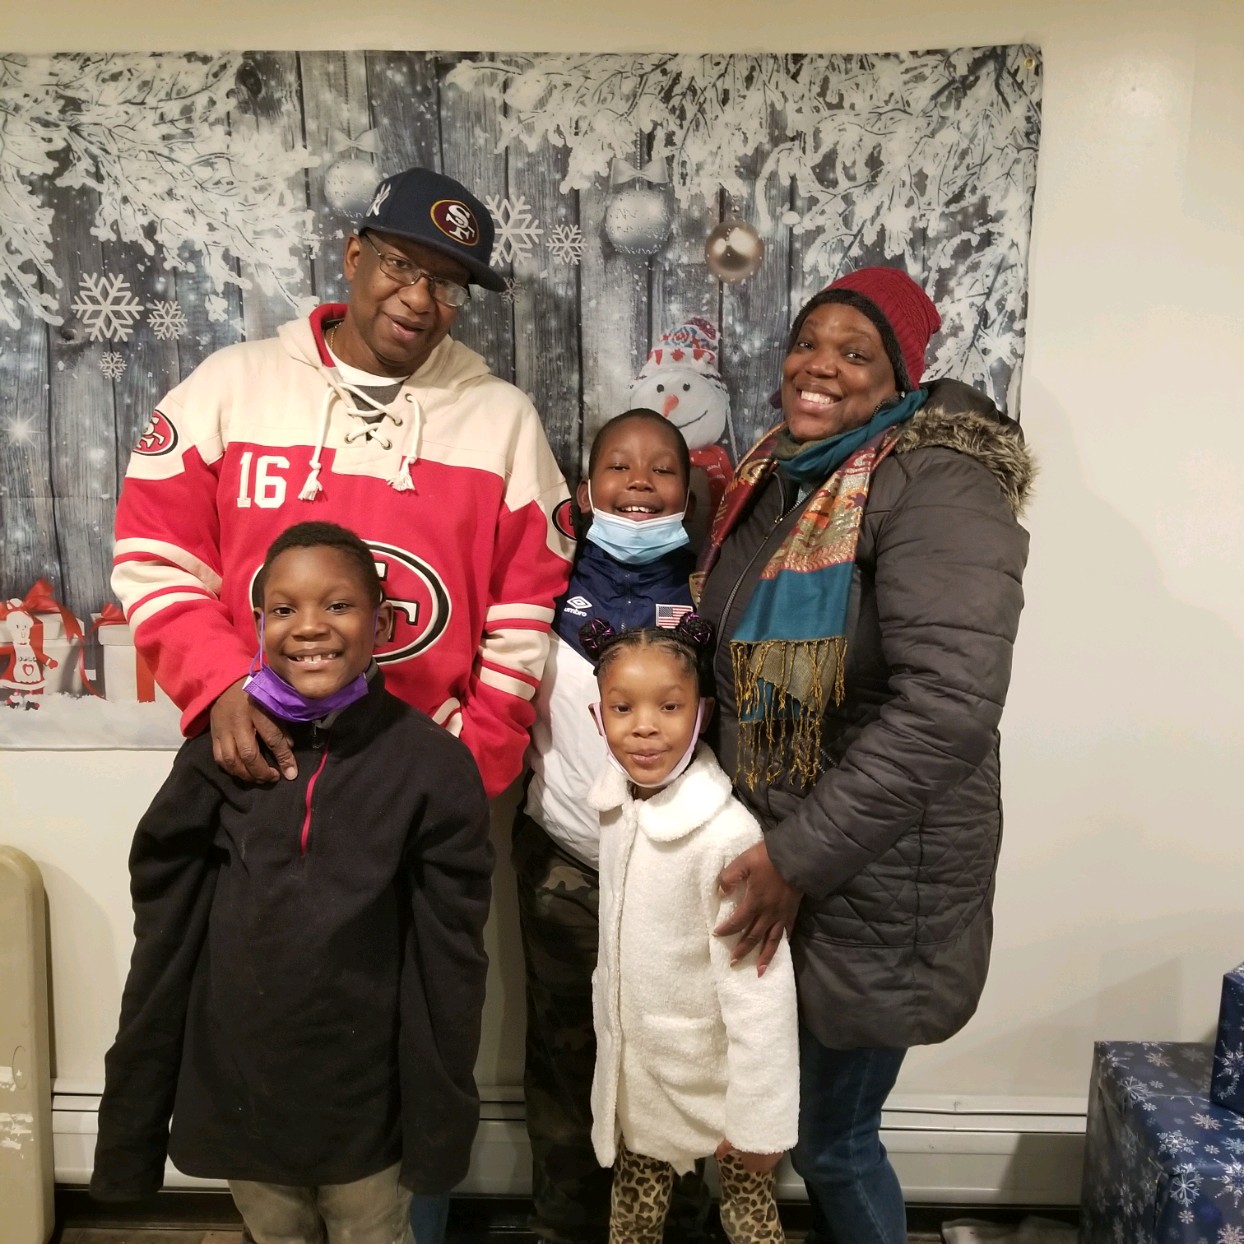 Bernard China and his wife, Constance, share a happy time with three of their five children, Devin, 9, Josiah, 7, and Syvona, 6.  Not in the photo, their two other children, Ajalon, 20, and Ishmael, 14.  Photo courtesy of NJ Sharing Network.